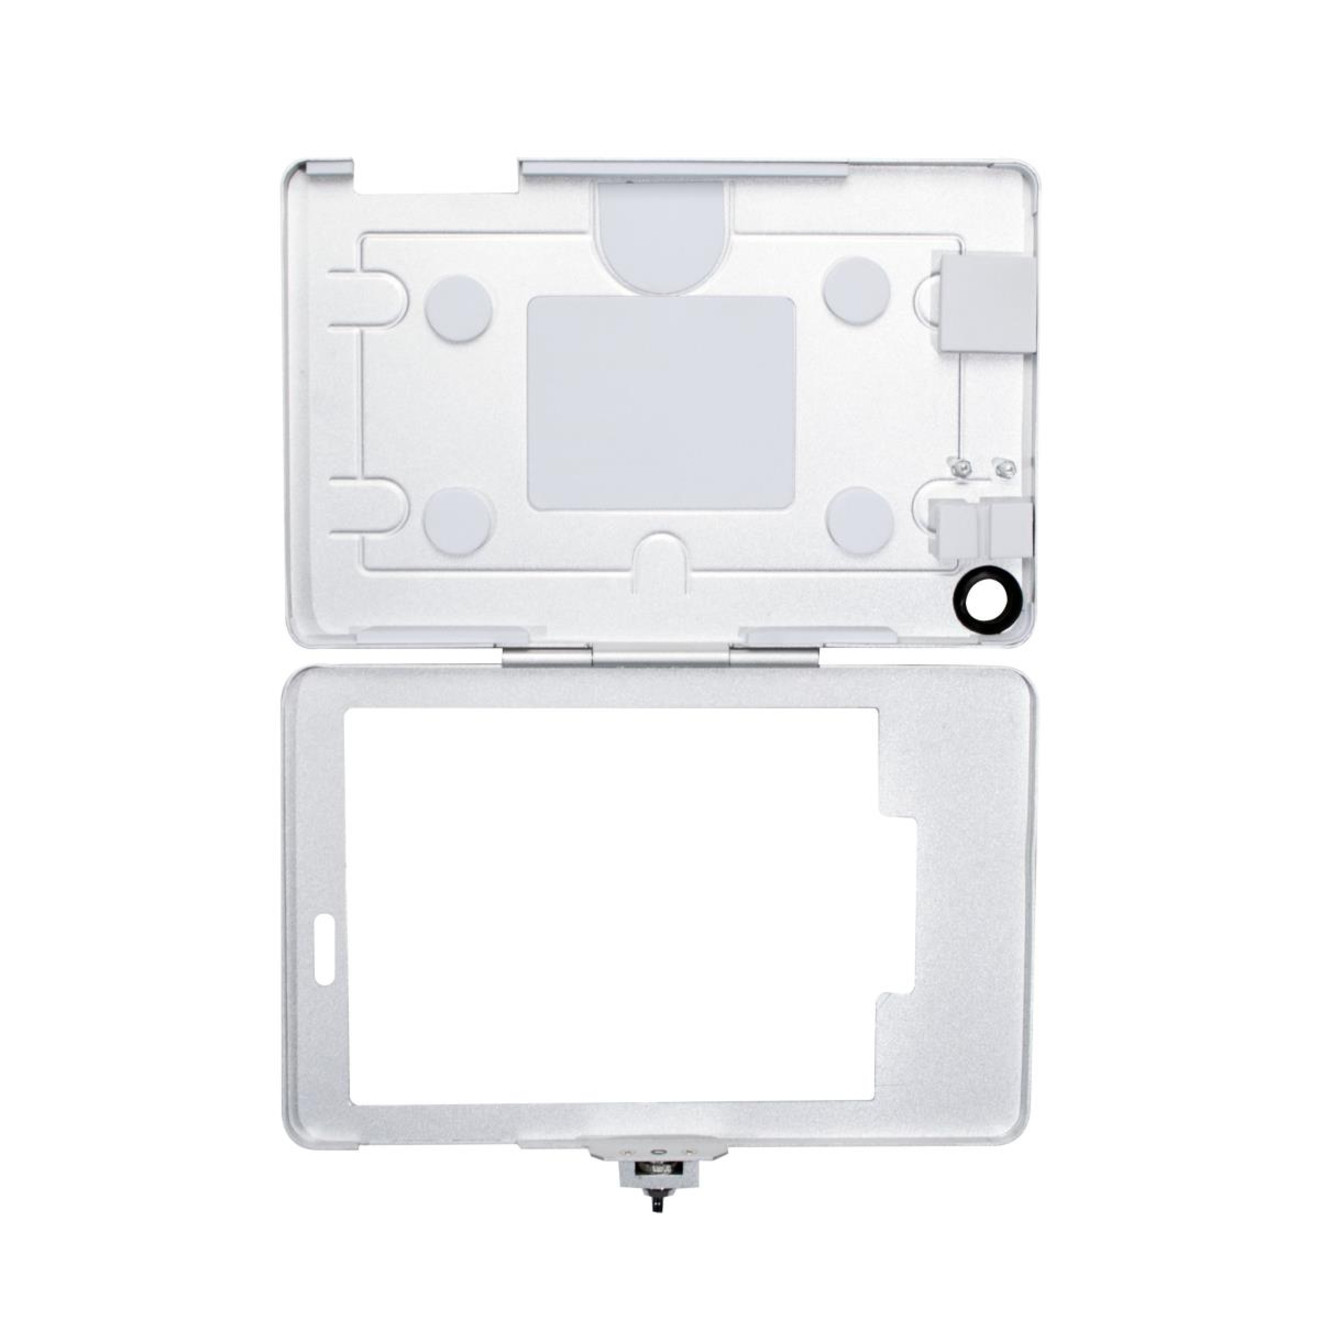 Cta Digital Accessories Security Wall Enclosure For Galaxy Tabs A /S2/S3 9.7In9.7″ Screen Support1 PAD-SWEG